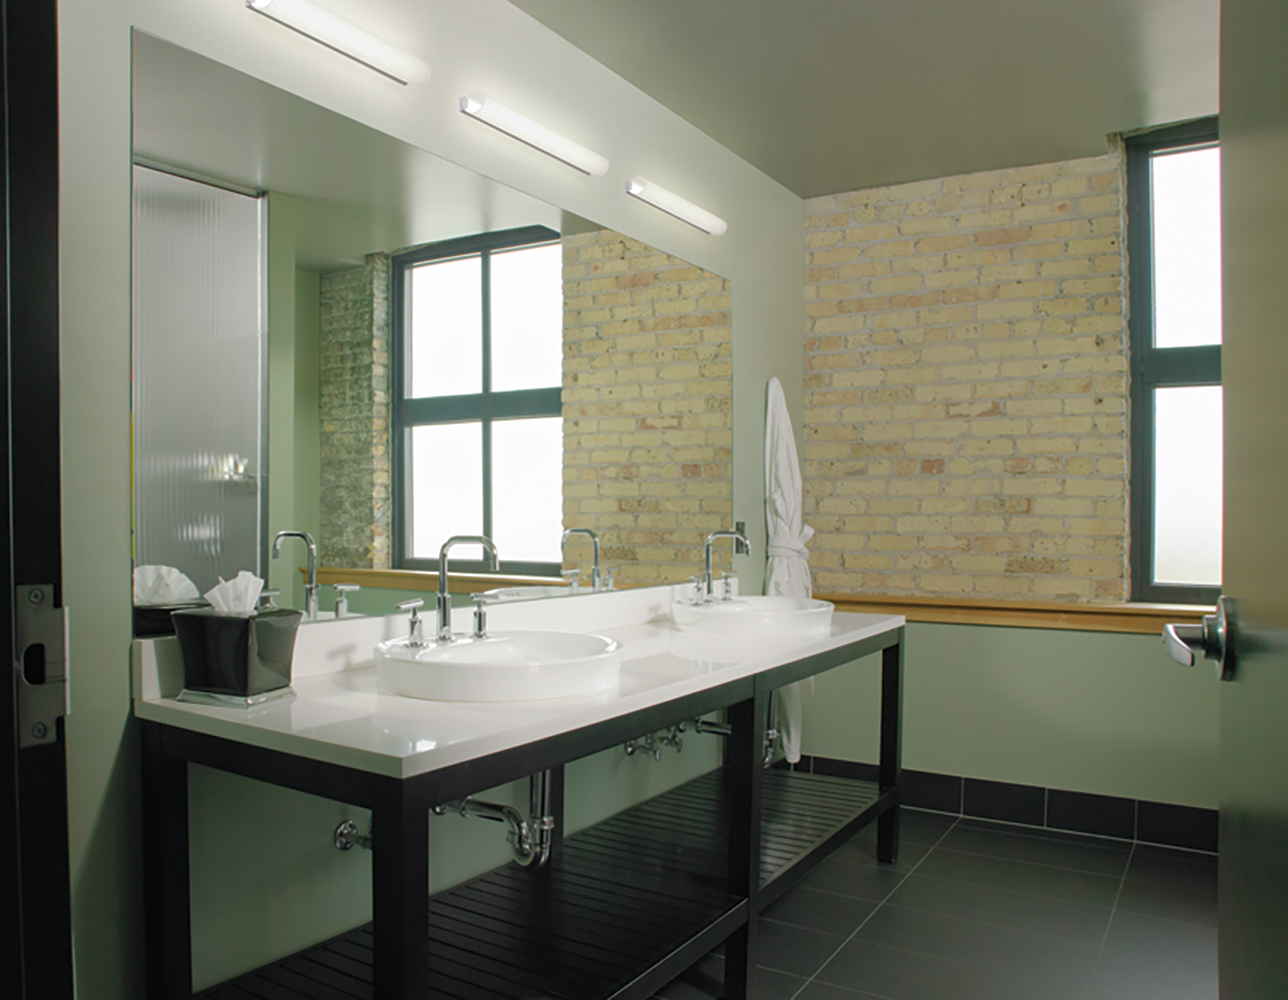 The Voila modern vanity light fixture, a luminous linear tube, above a clean mirror and double sink in a small bathroom.